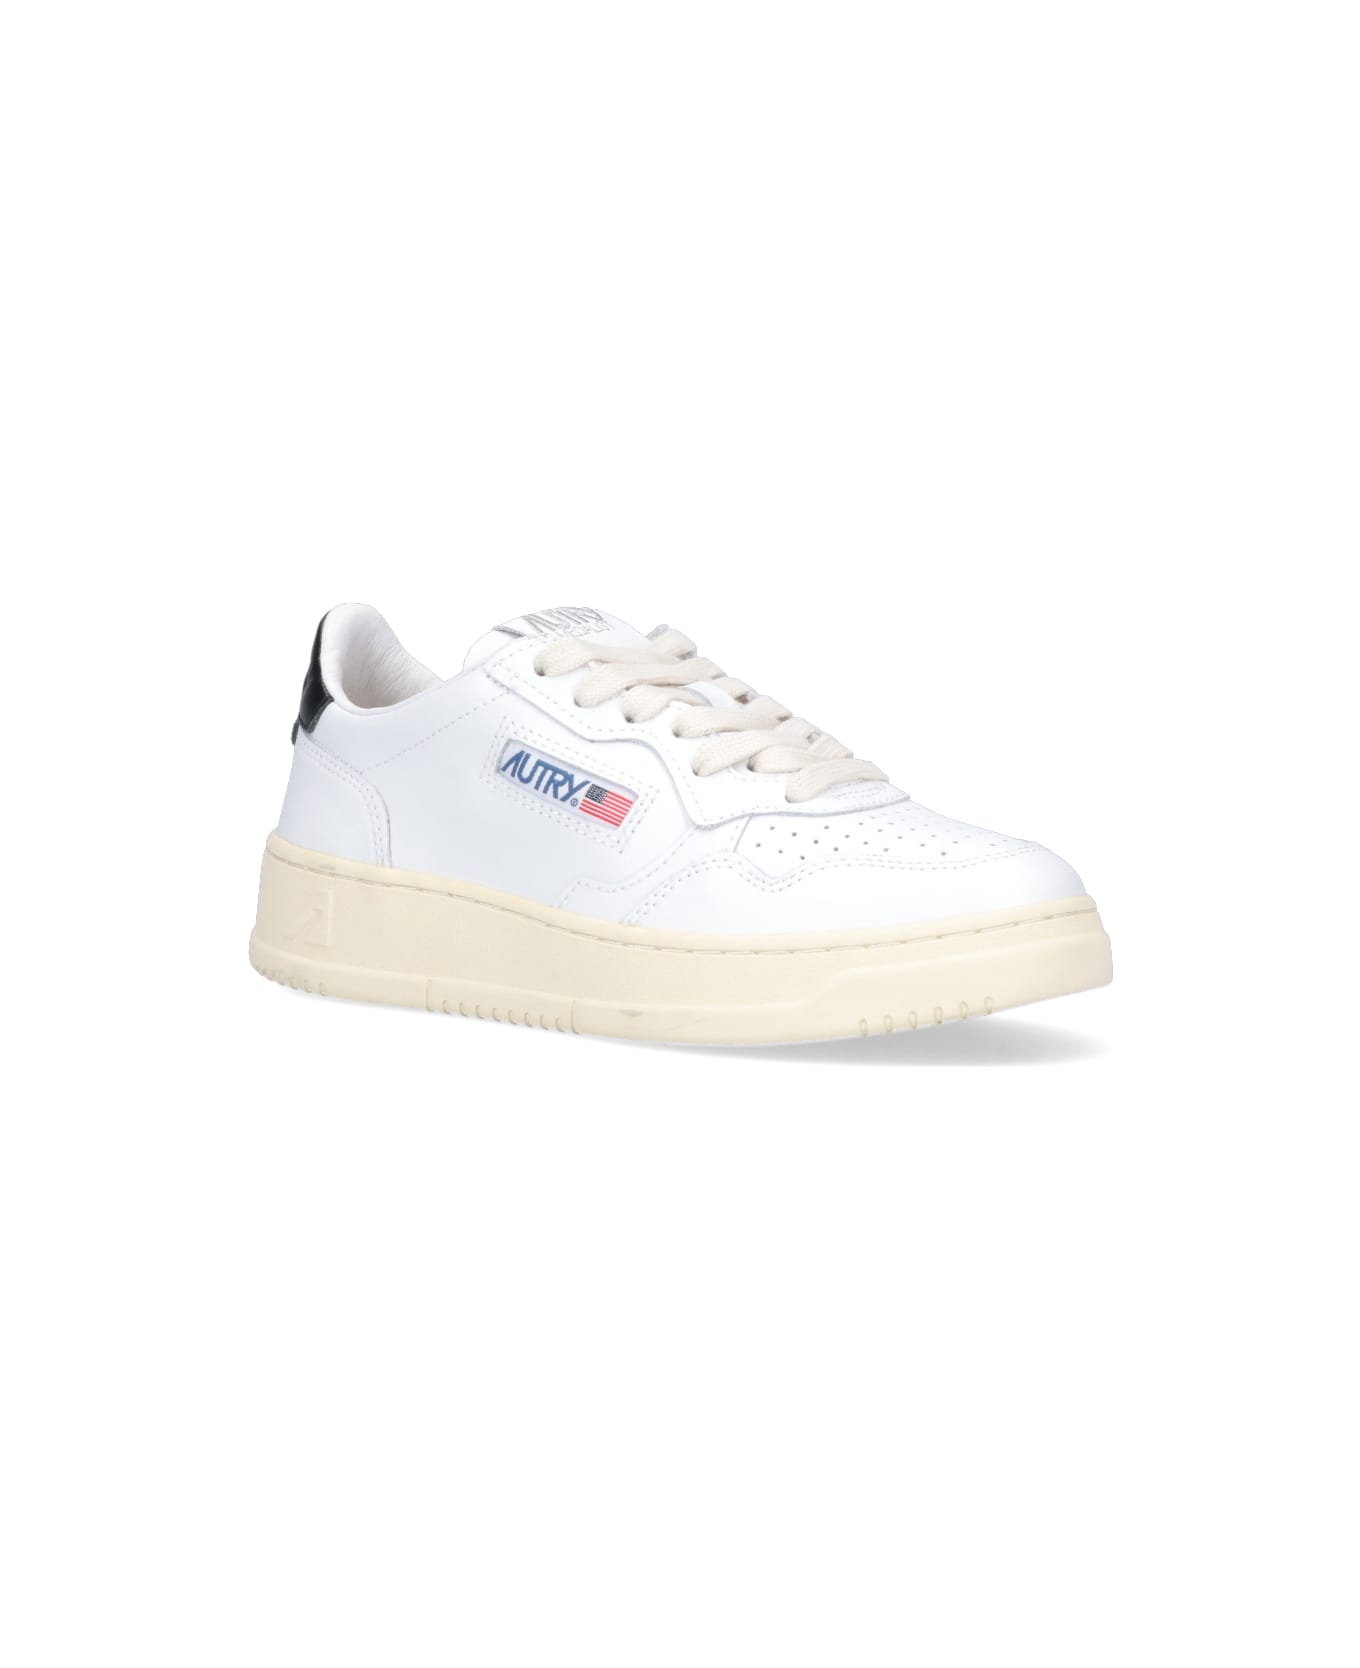 Autry Sneakers Low 'medalist' - White スニーカー